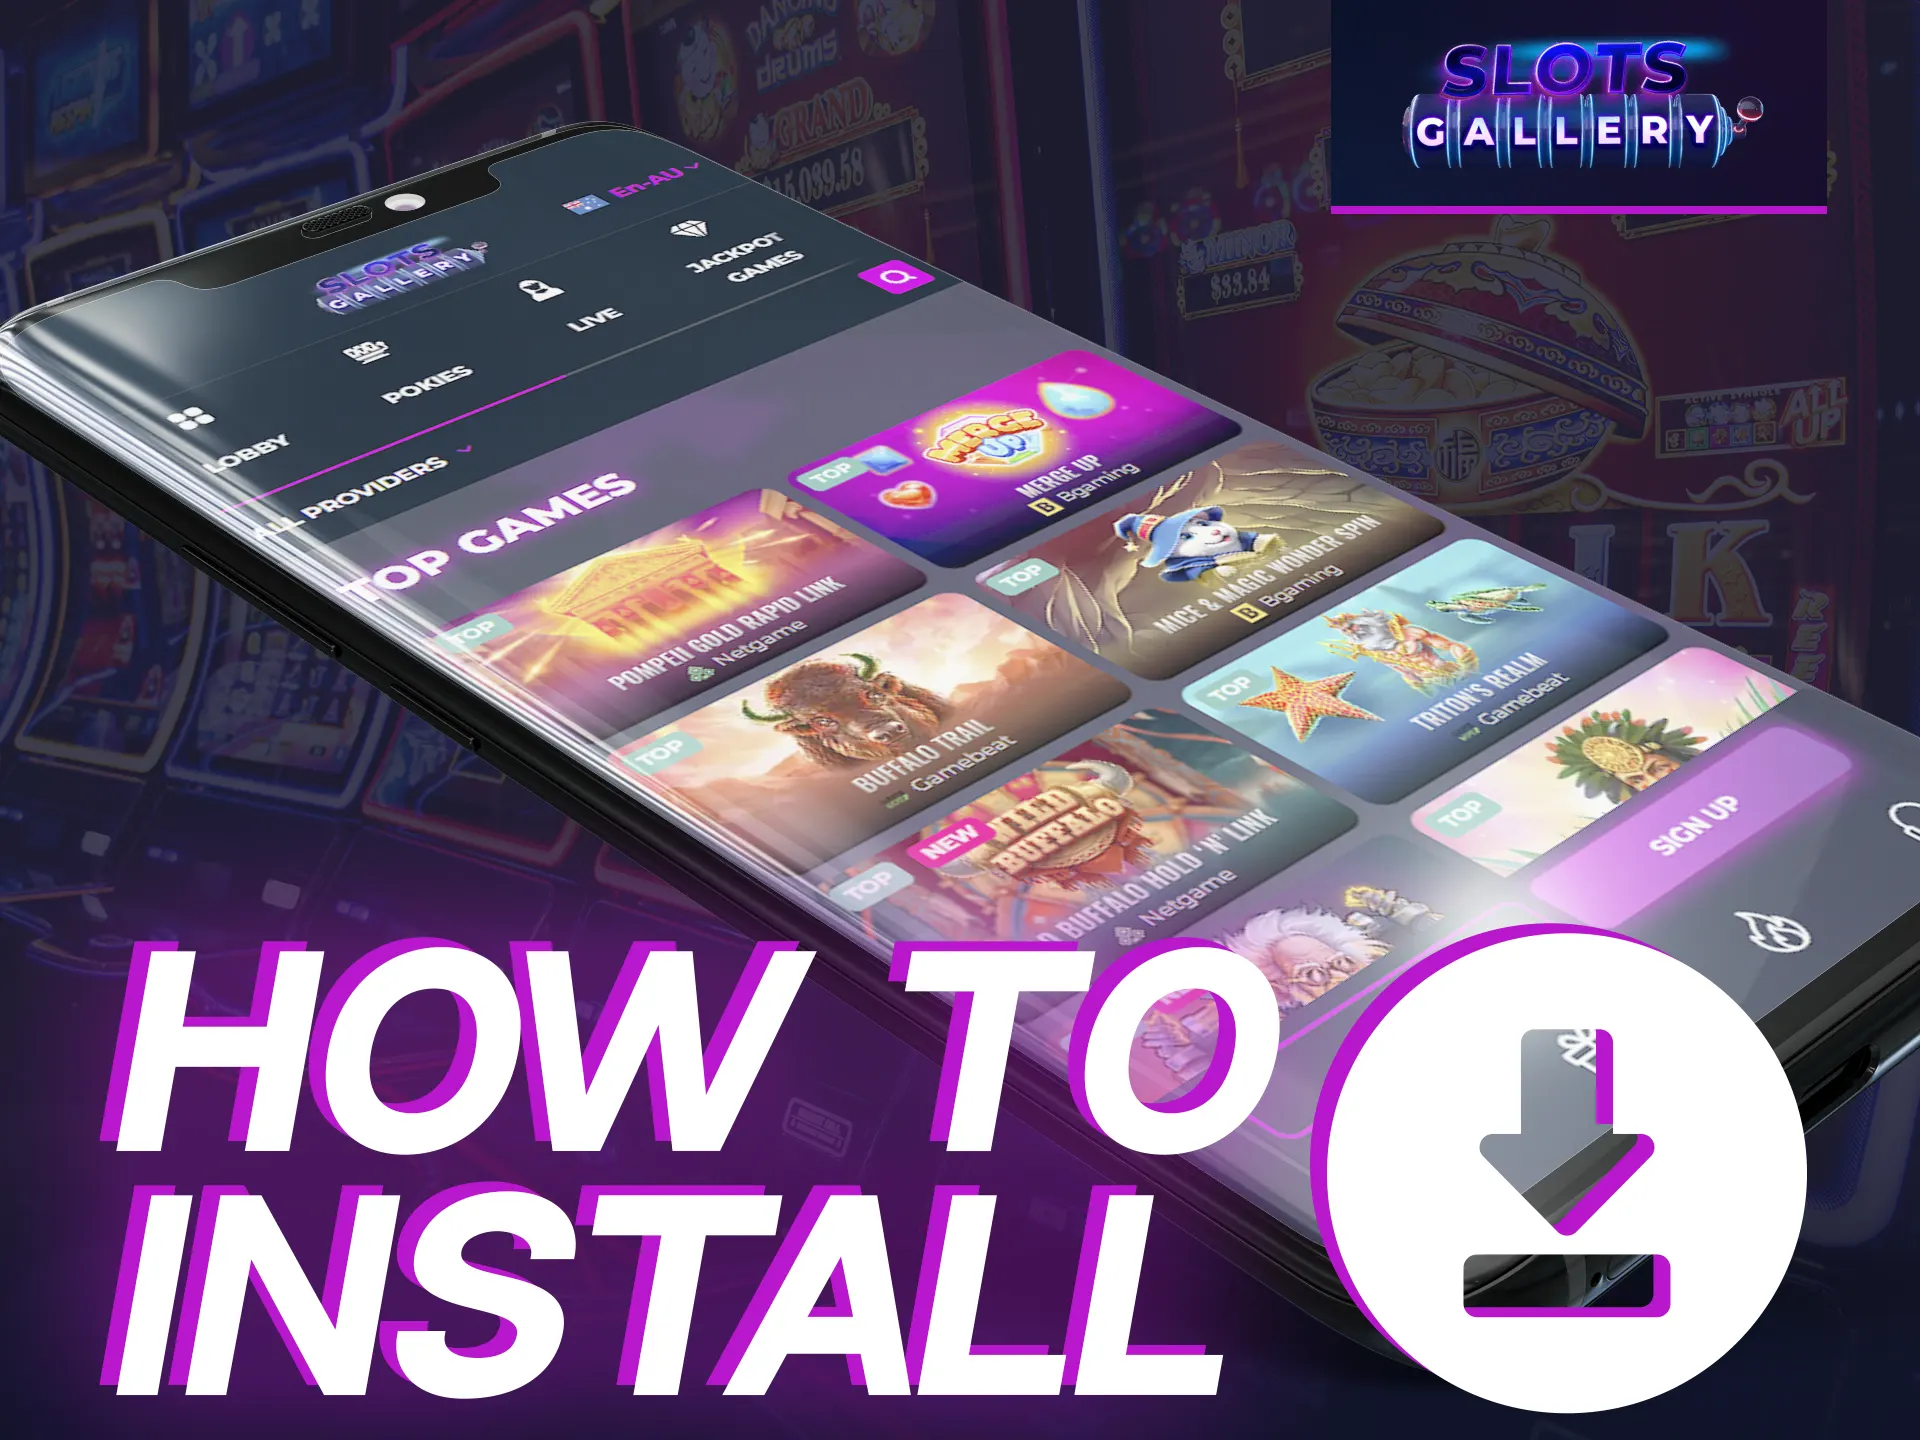 Learn how you can install a slots gallery app.